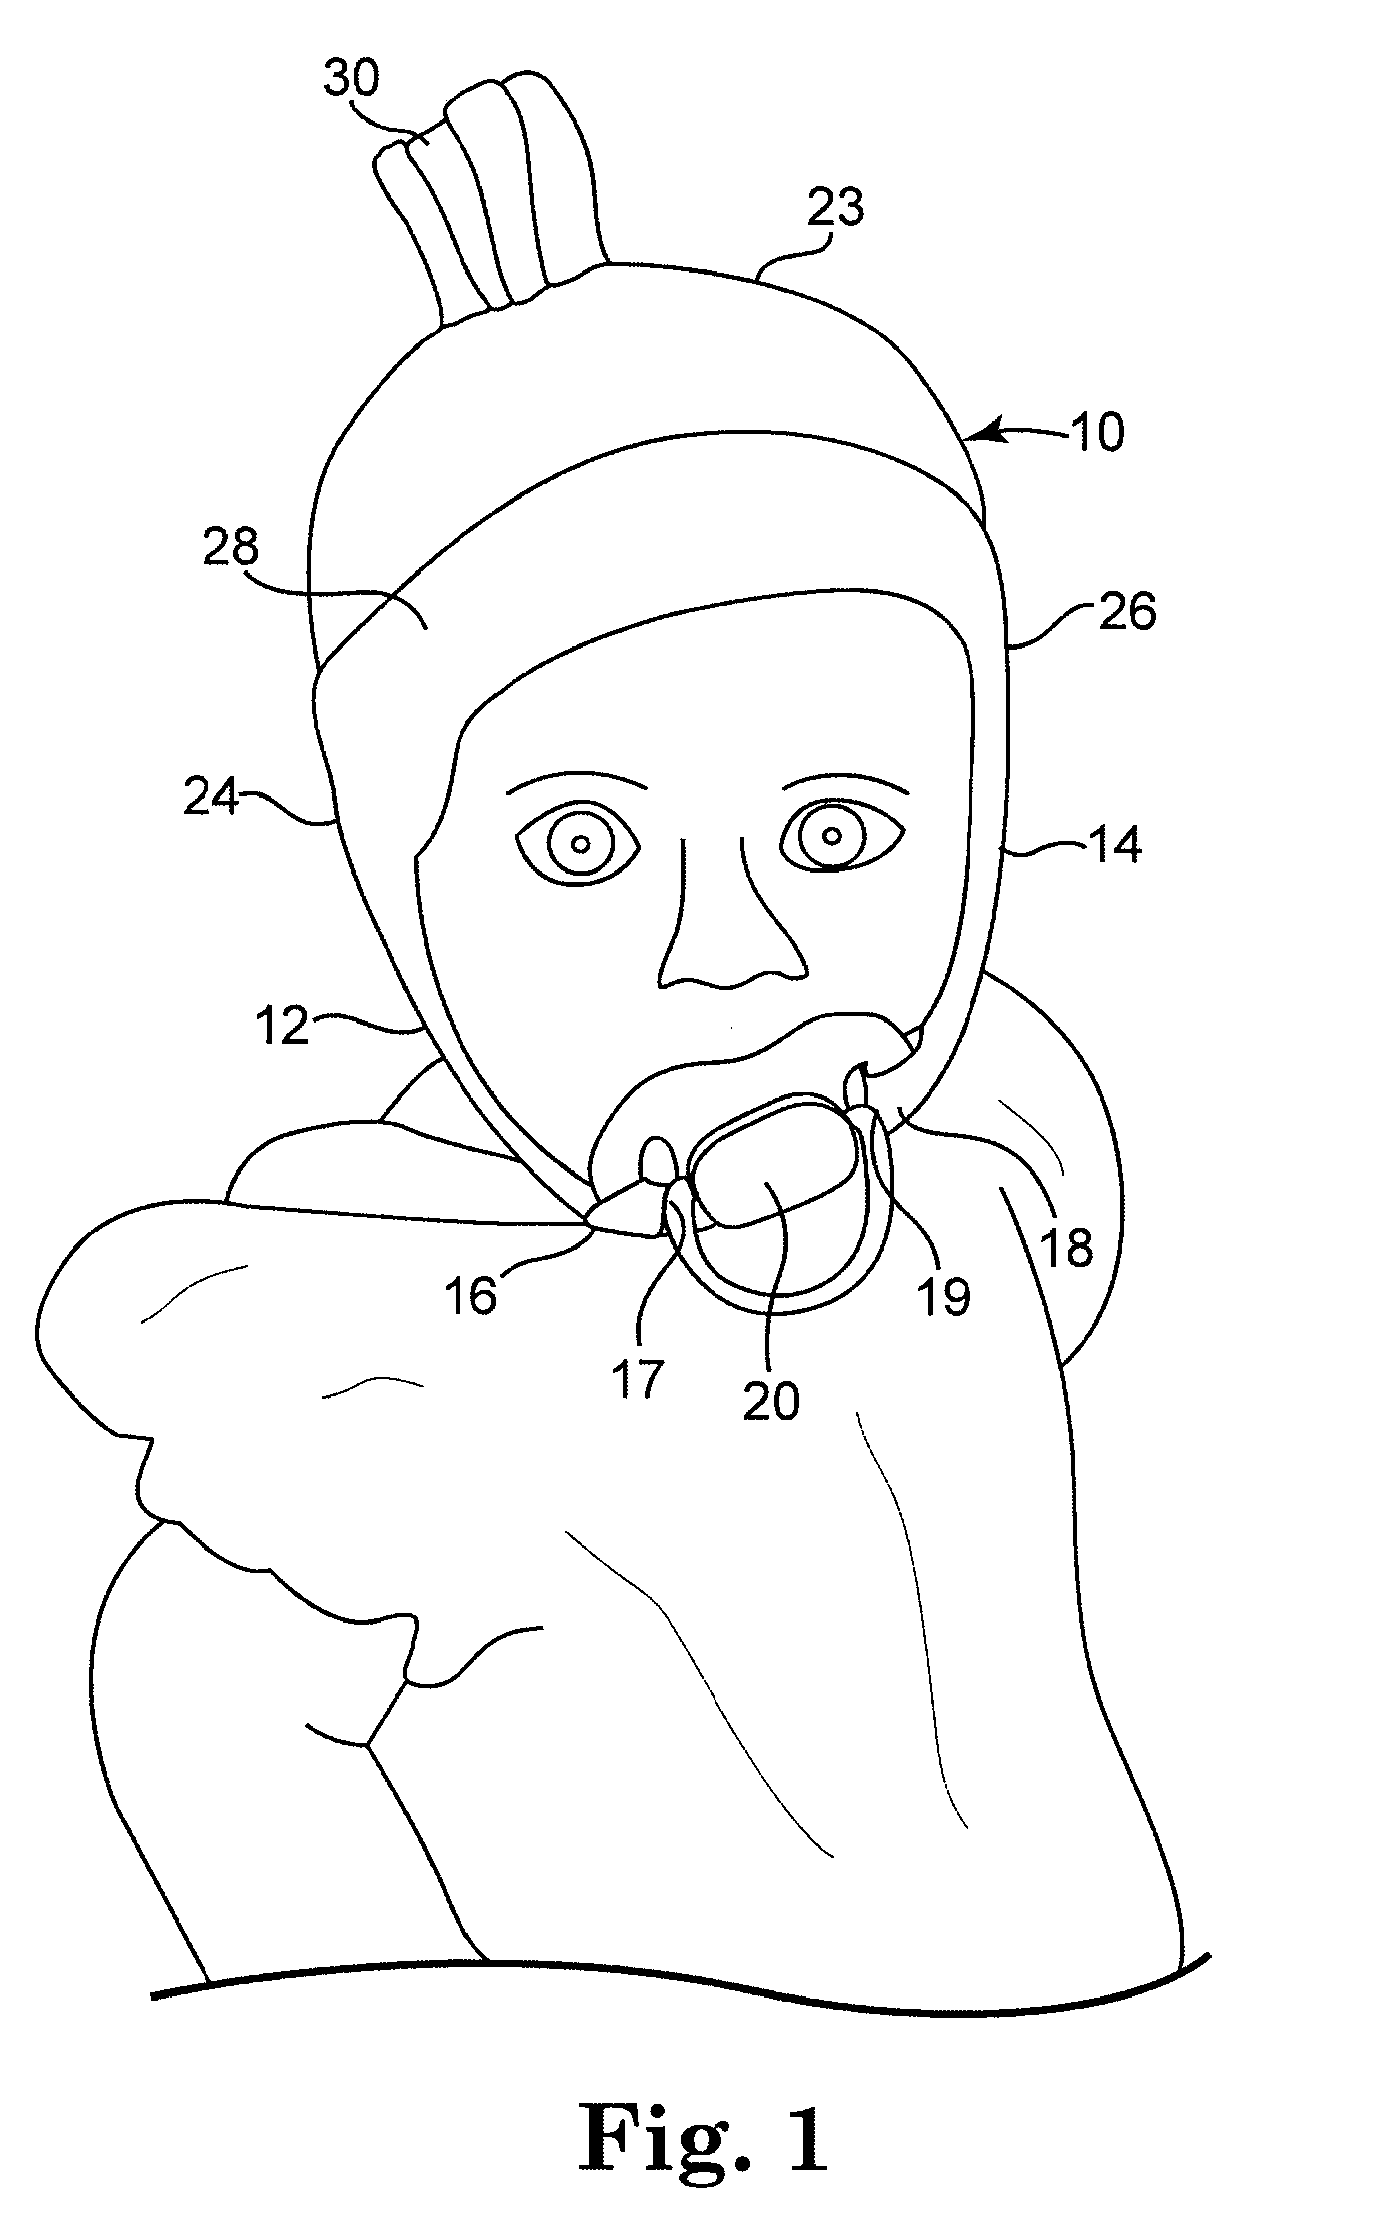 Pacifier securing device